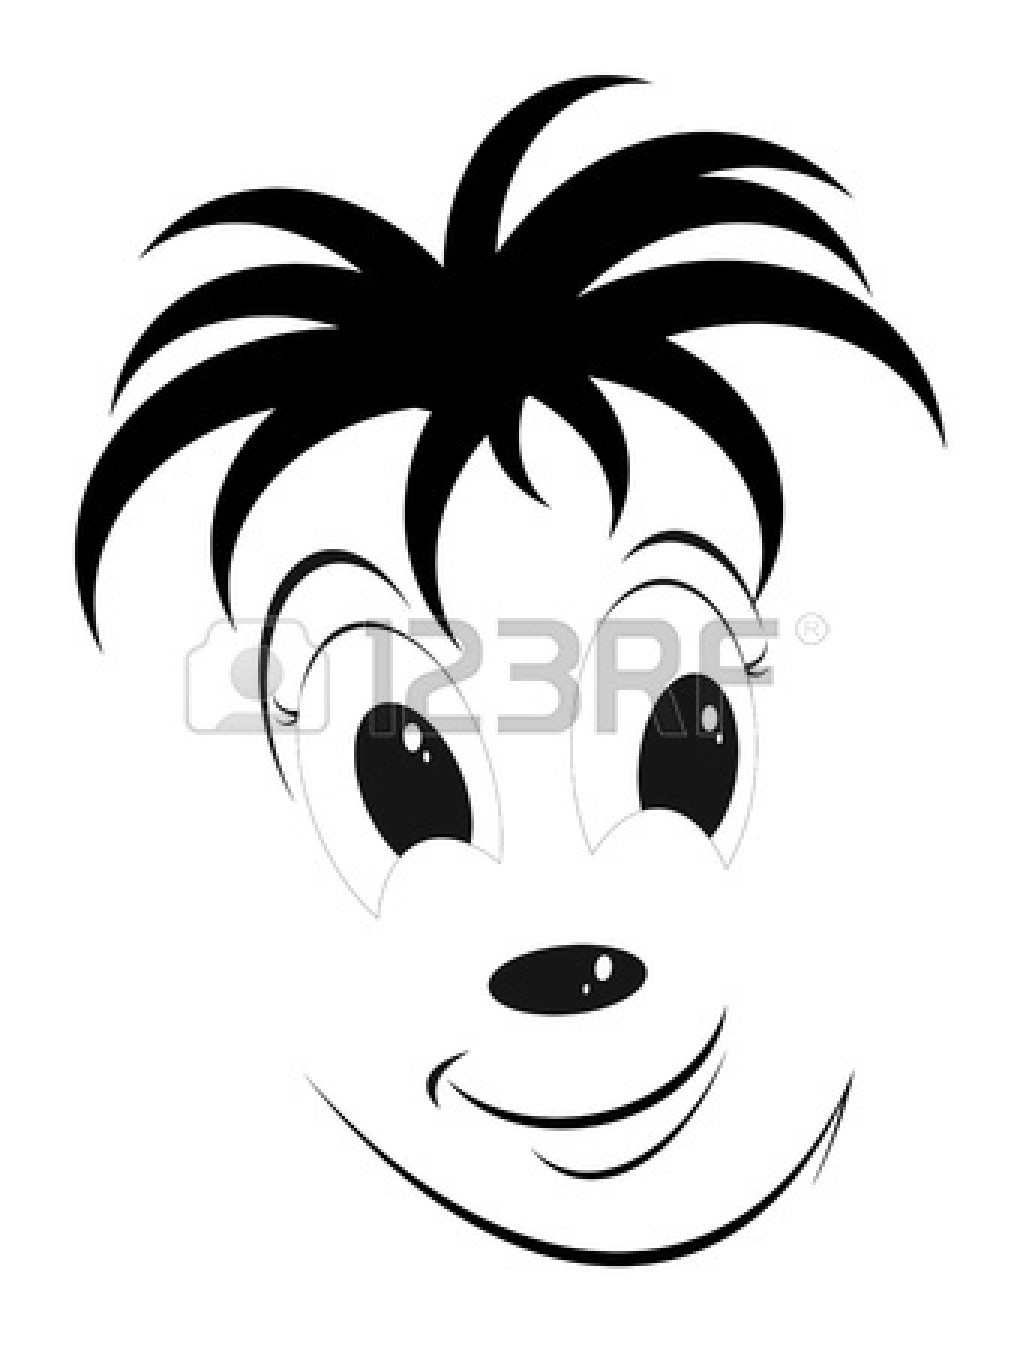 Smiley Face Thumbs Up Clipart Black And White   Clipart Panda   Free